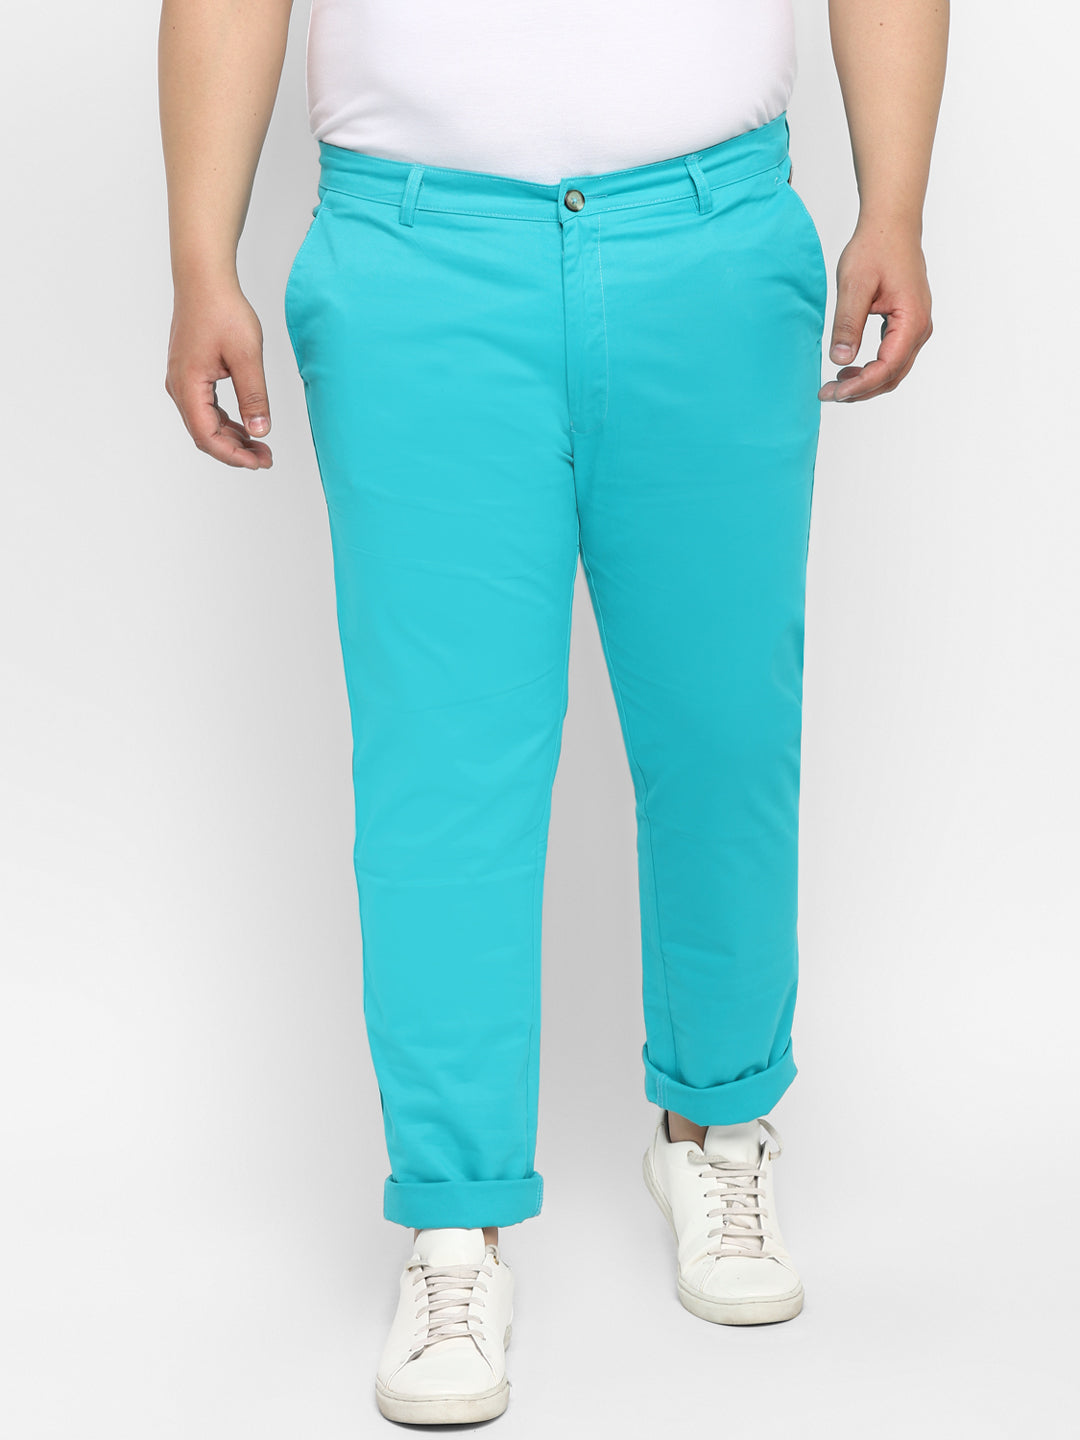 Plus Men's Turquoise Blue Cotton Regular Fit Casual Chinos Trousers Stretch